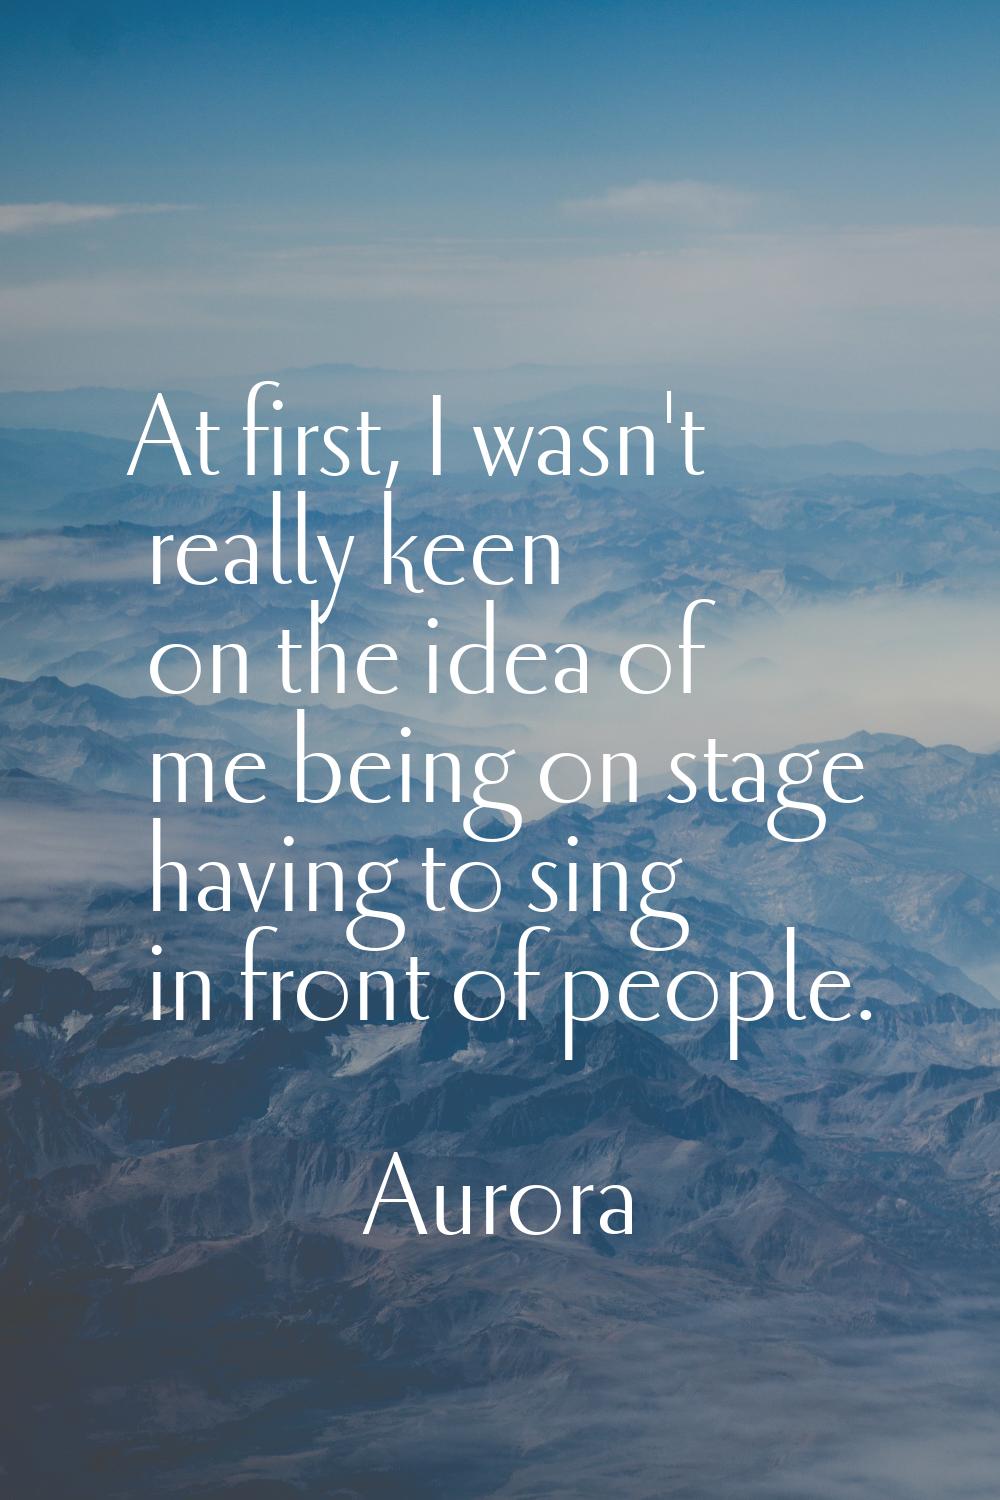 At first, I wasn't really keen on the idea of me being on stage having to sing in front of people.